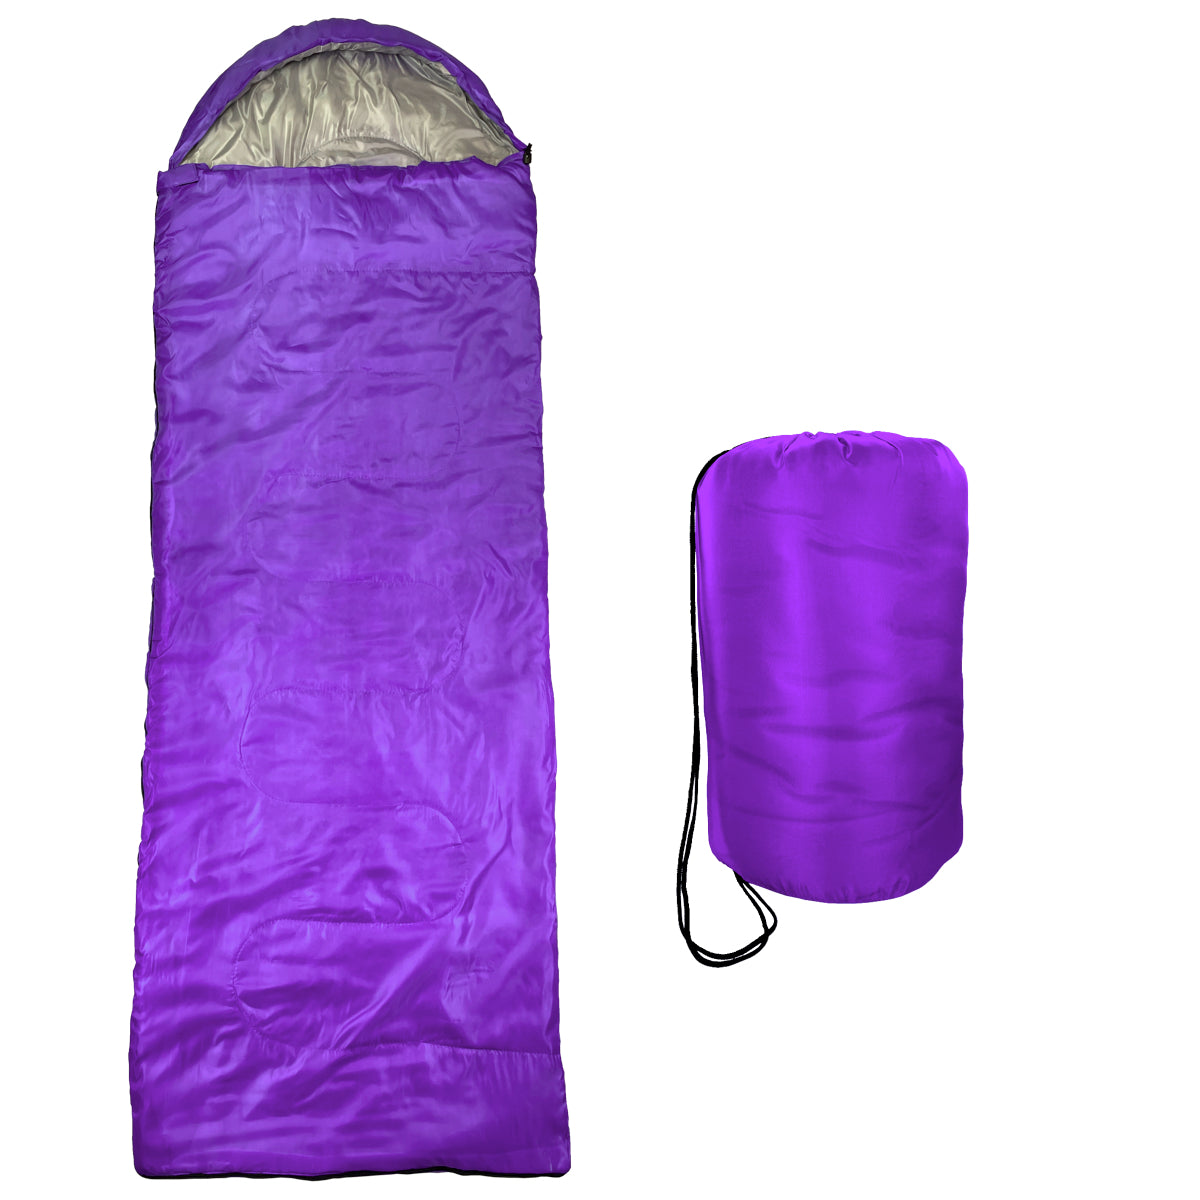 RNX Ultralight Water Resistant Sleeping Bag 50F - 86F - Available in 4 Colors